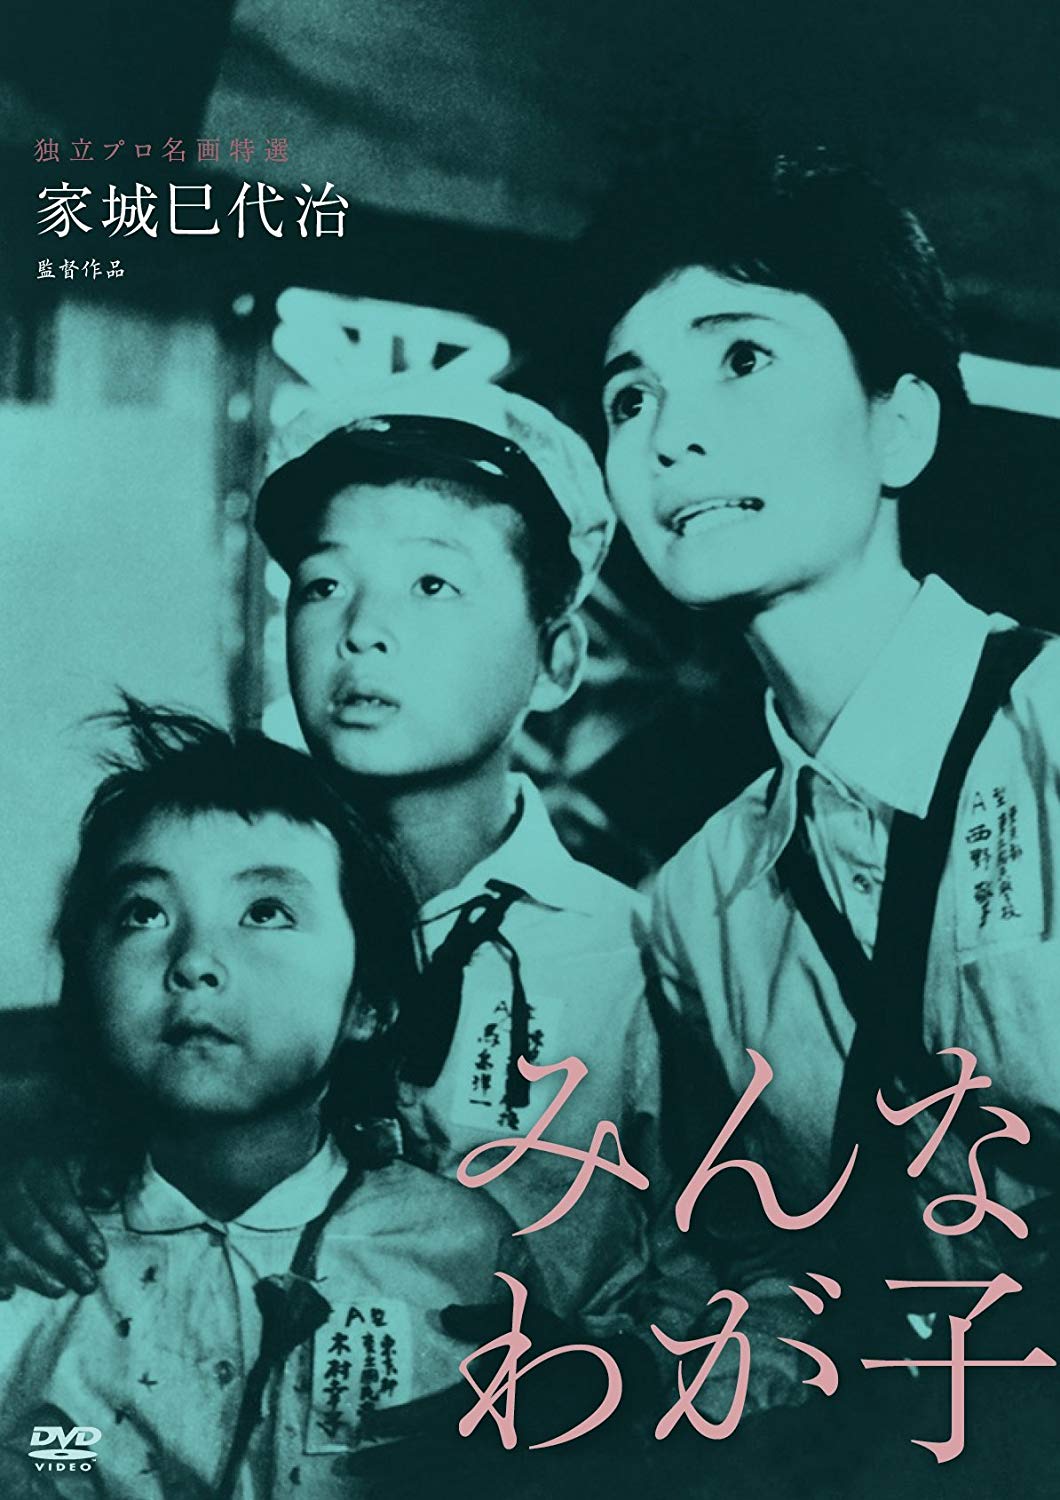 All My Children (1963) with English Subtitles on DVD on DVD